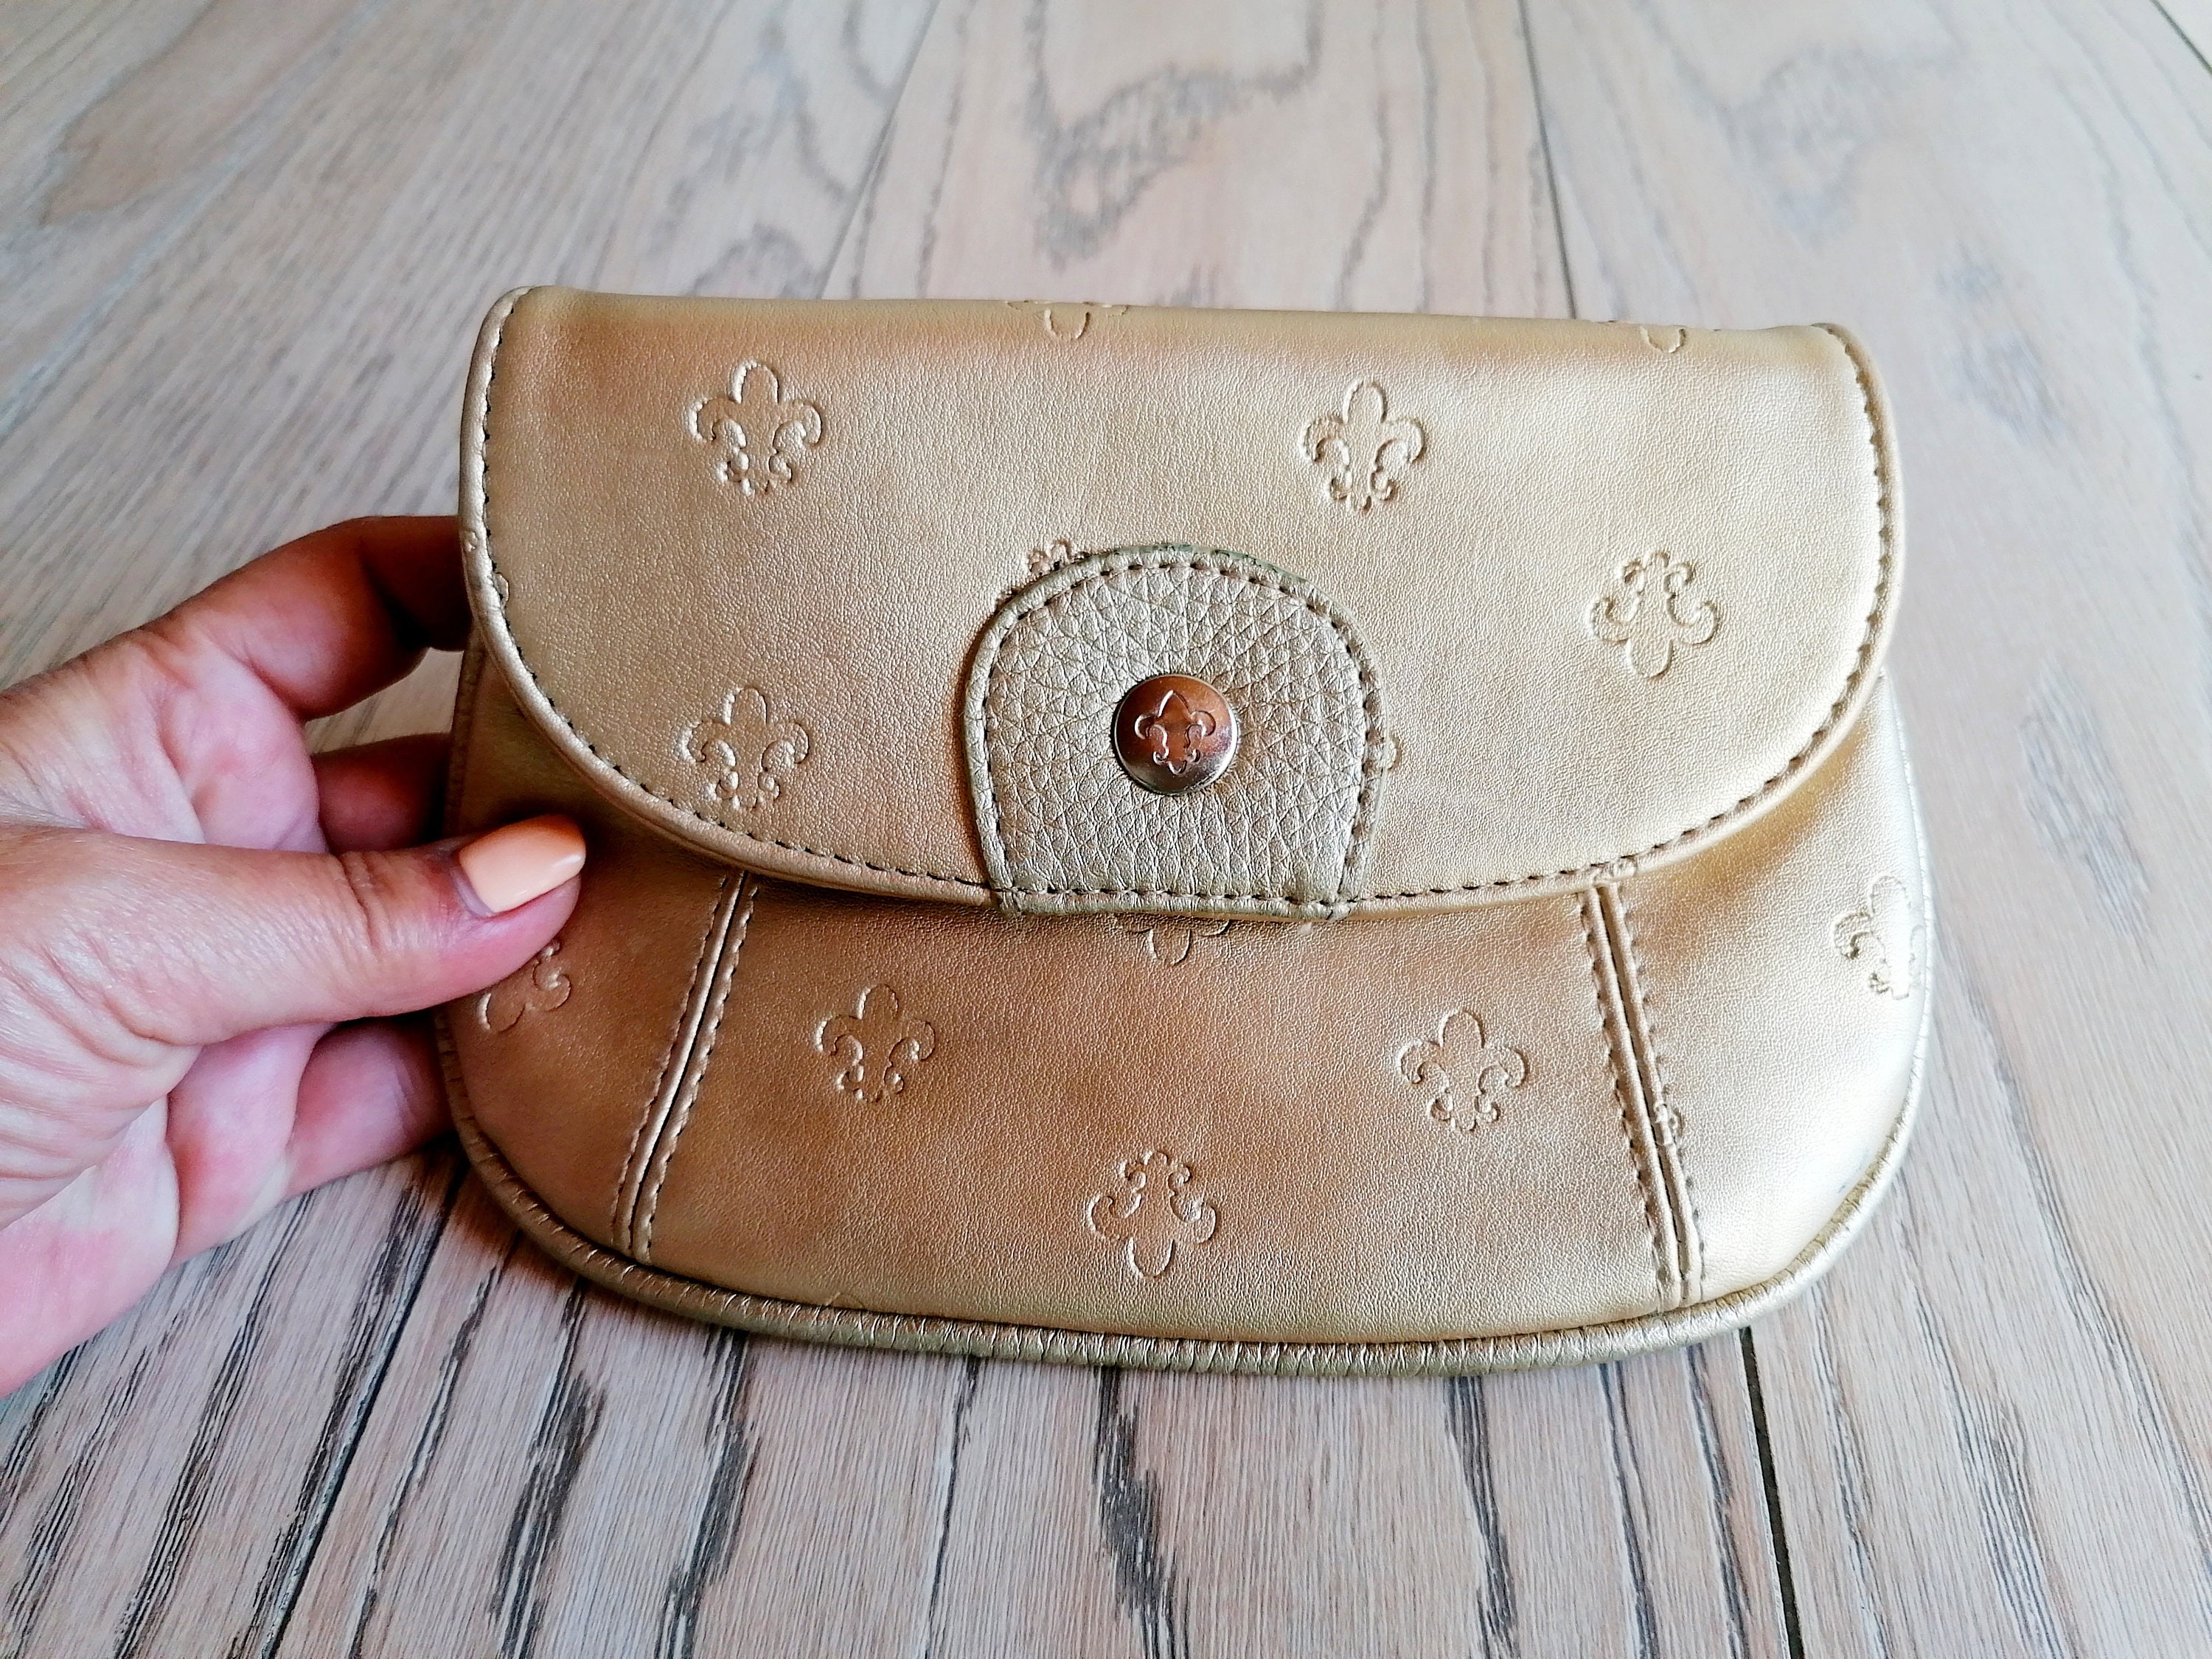 Vintage Friis Company Clutch Gold Leather Small Bag Clutch Bag | Etsy